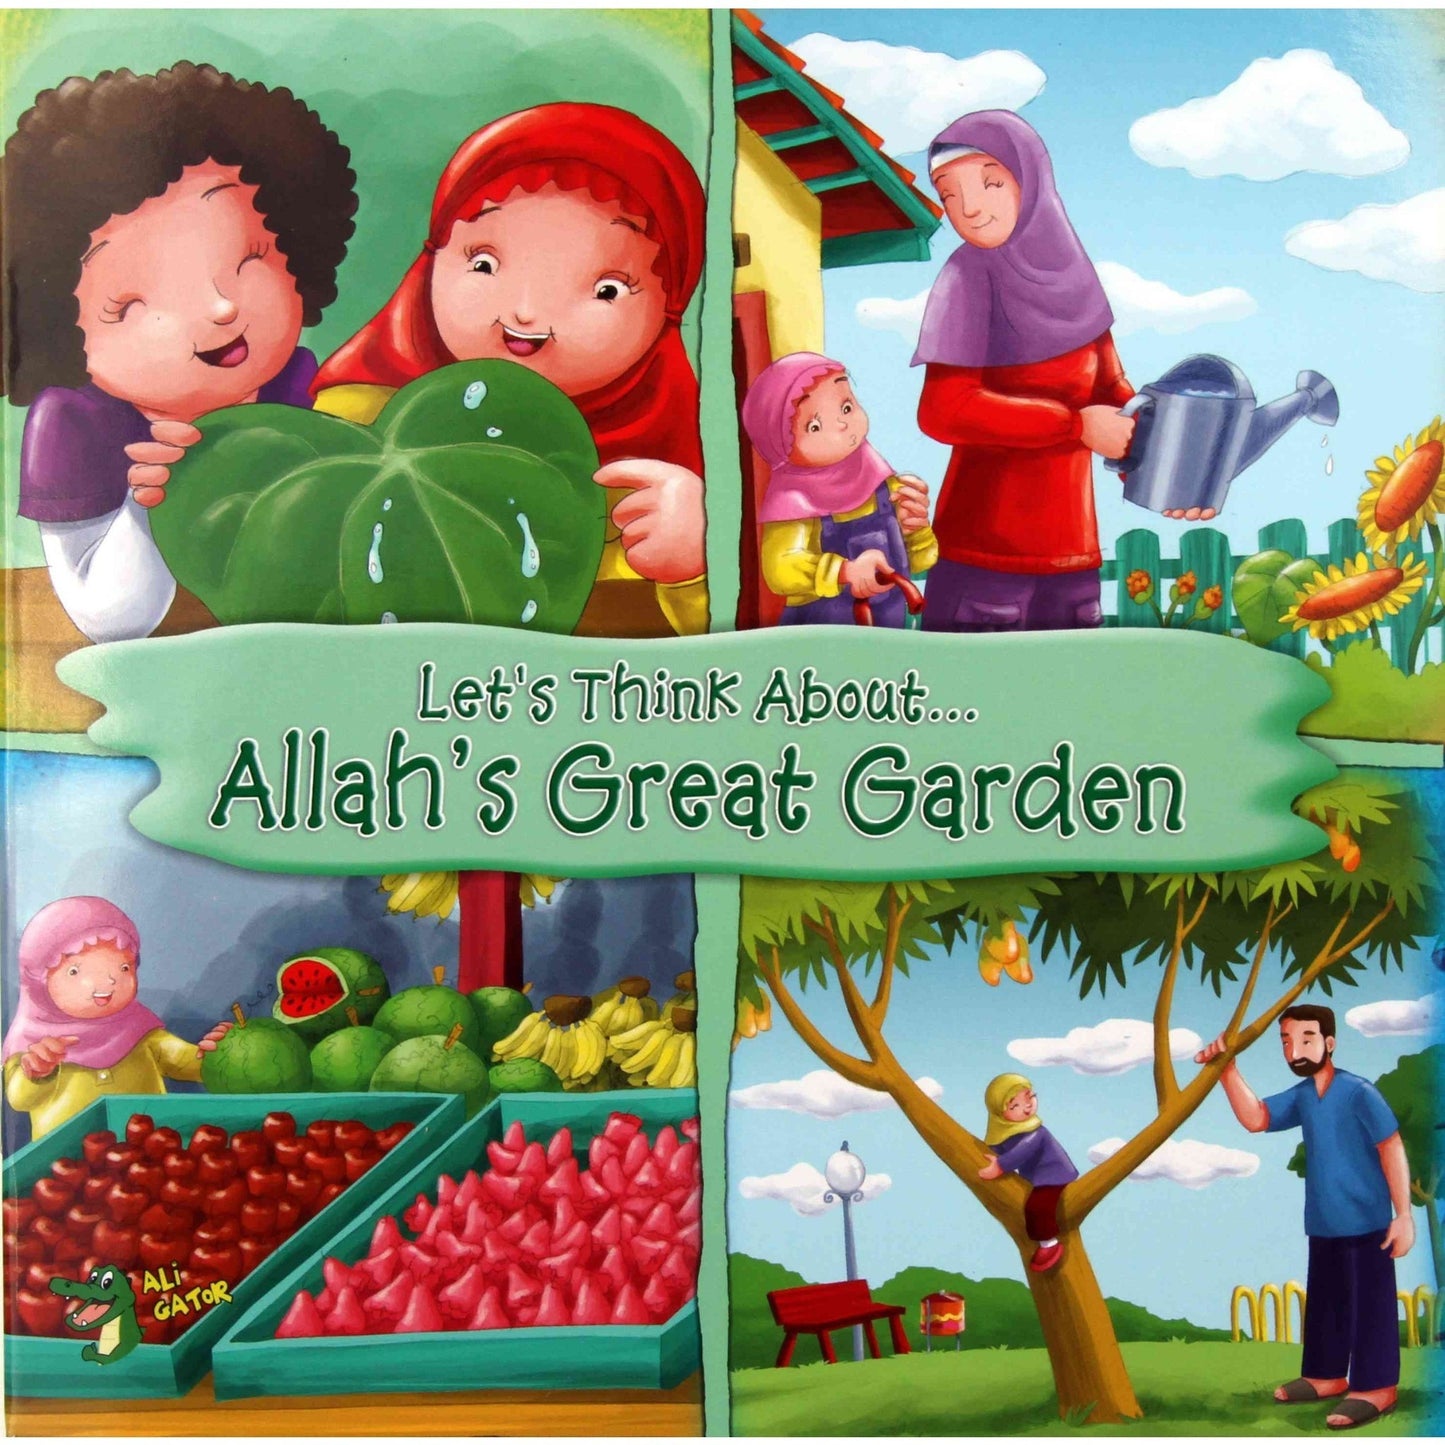 Let's Think About... Allah's Great Garden